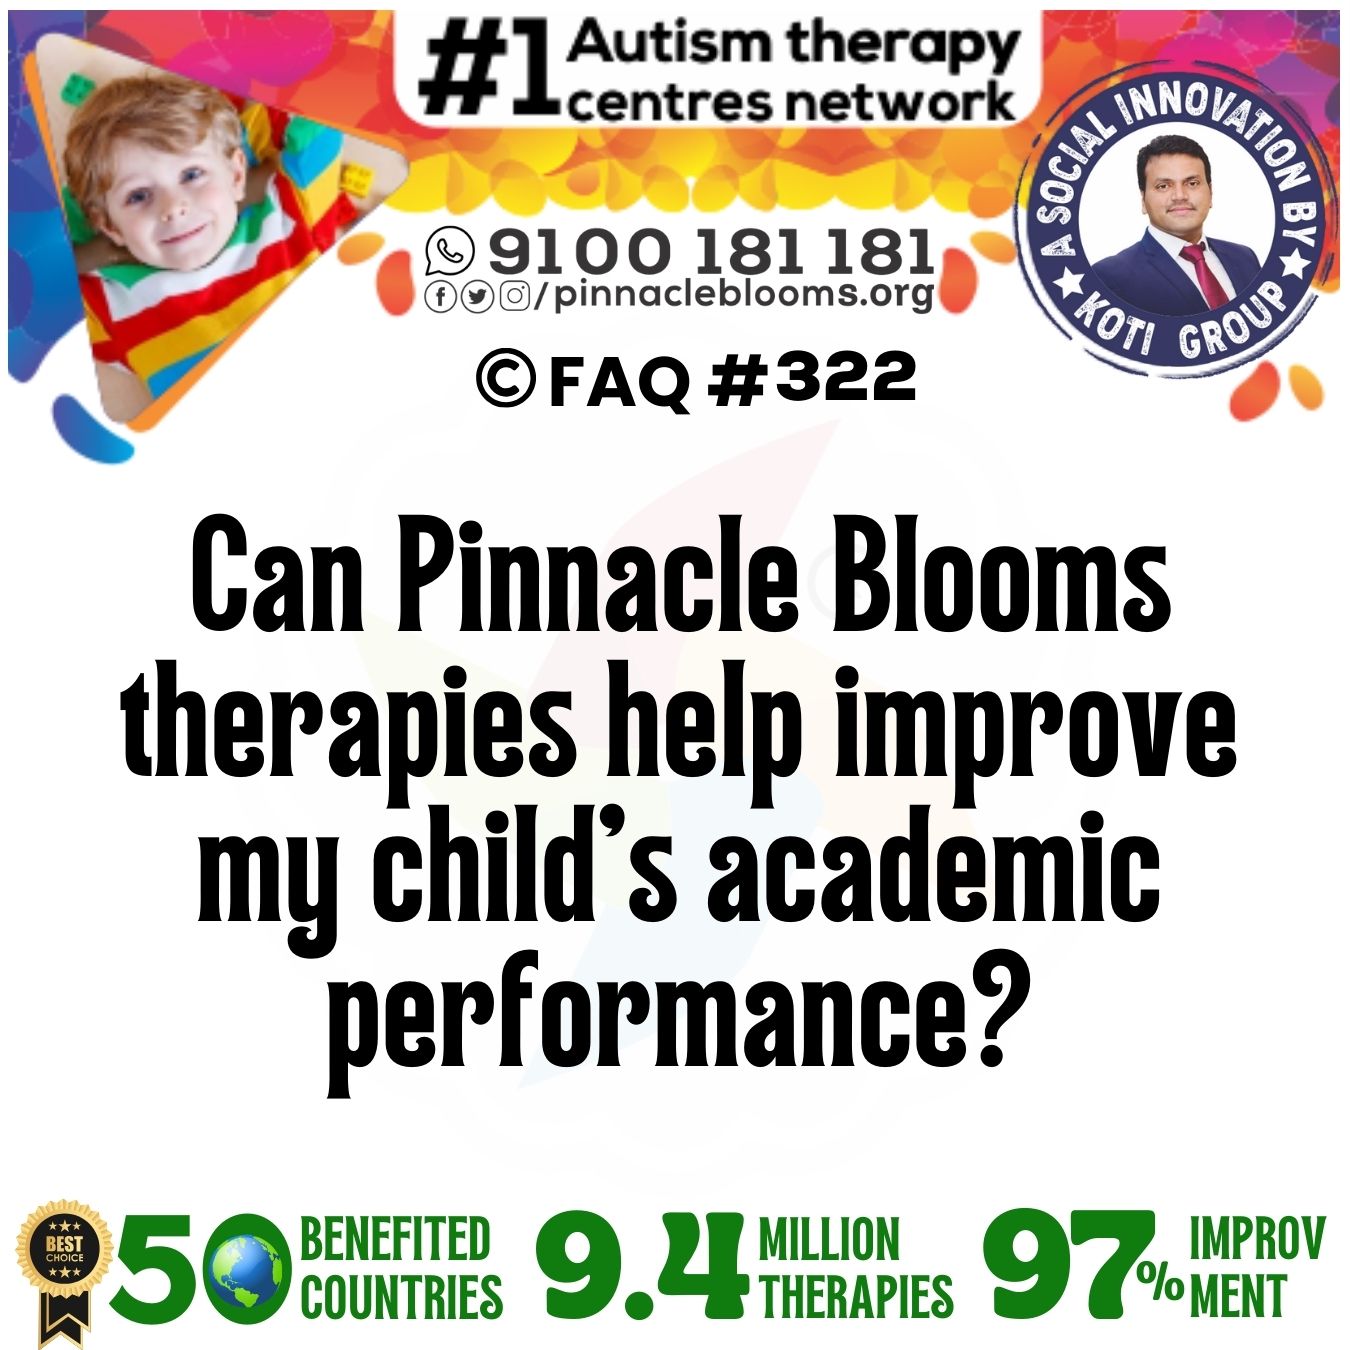 Can Pinnacle Blooms therapies help improve my child's academic performance?